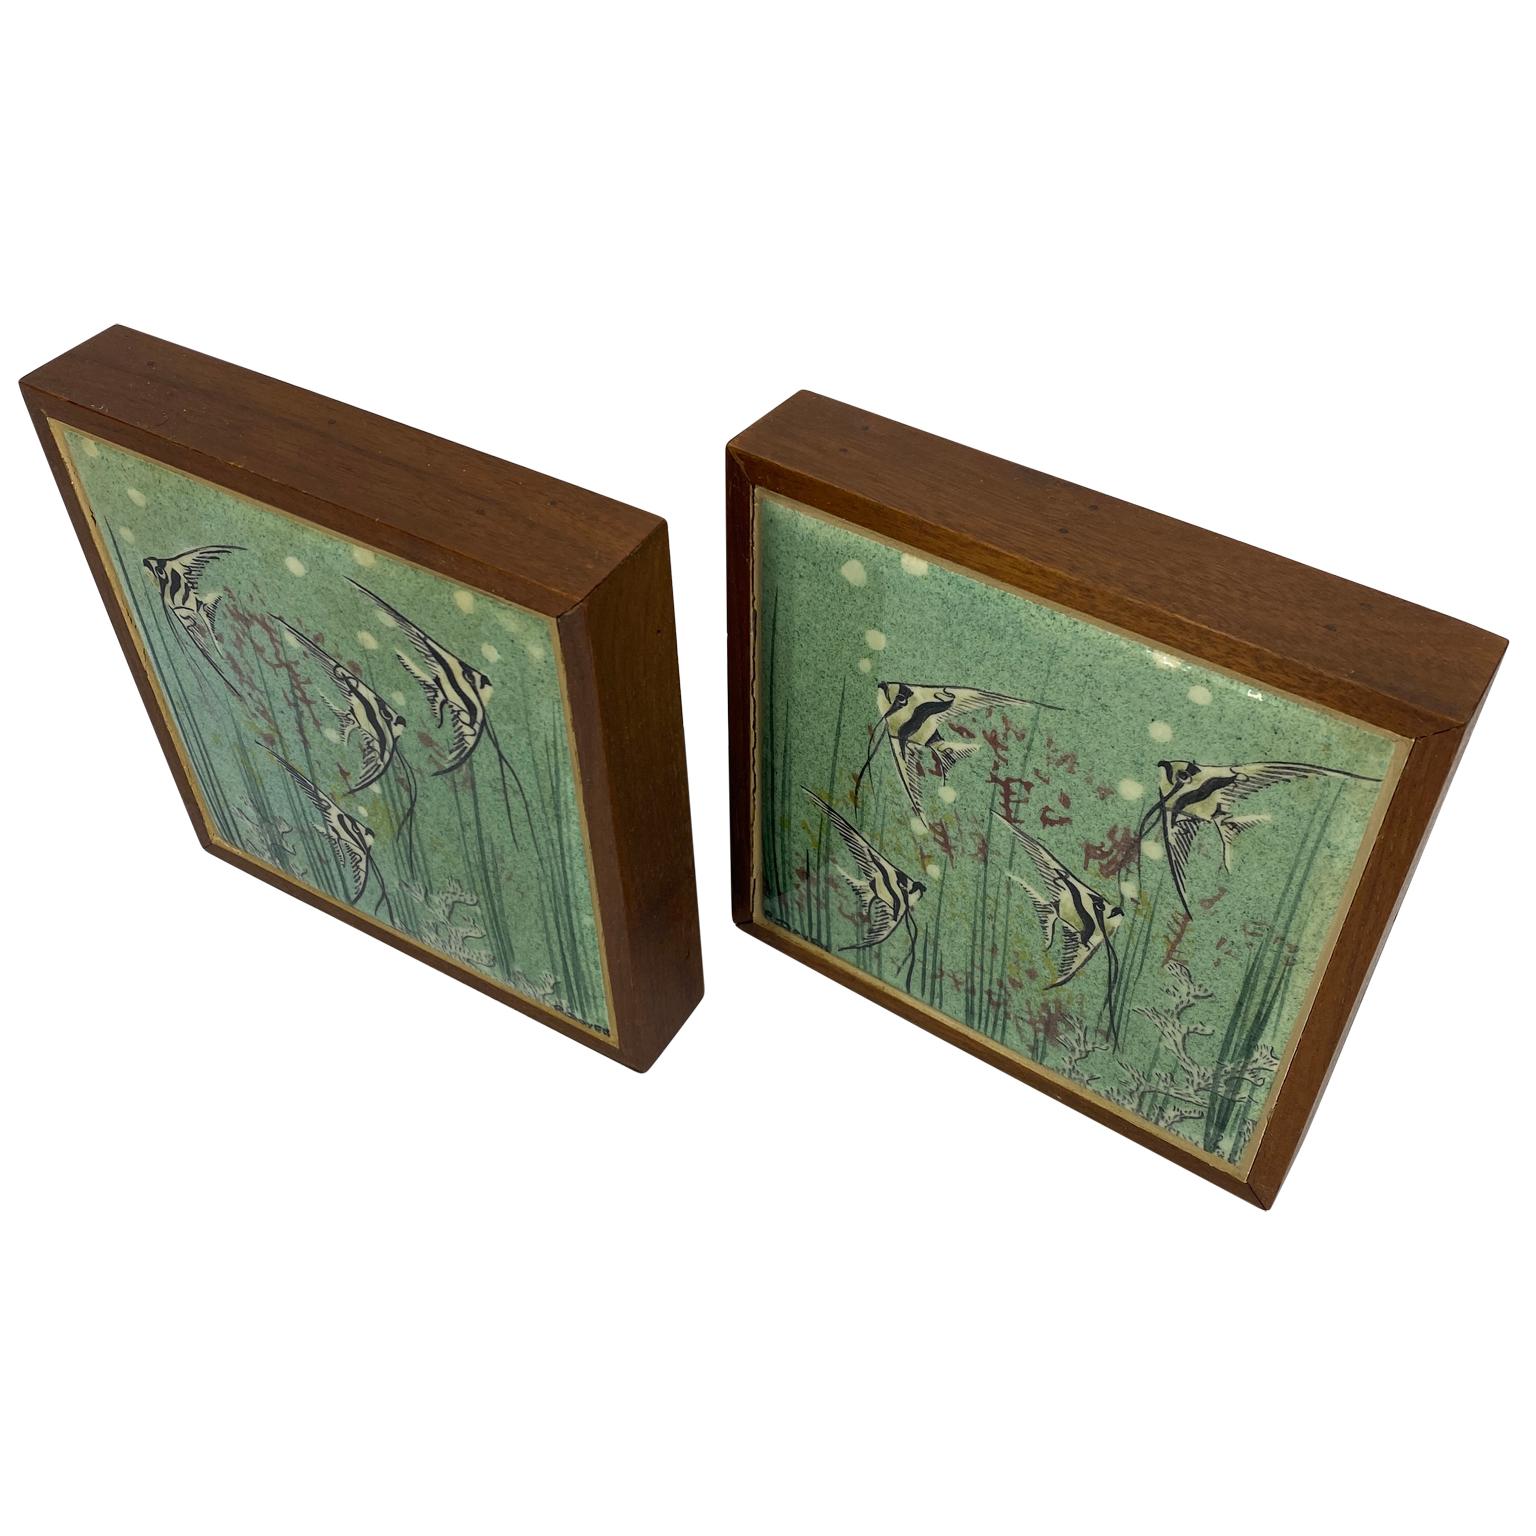 American Pair of Signed Mid-Century Modern Walnut and Tile Book Ends